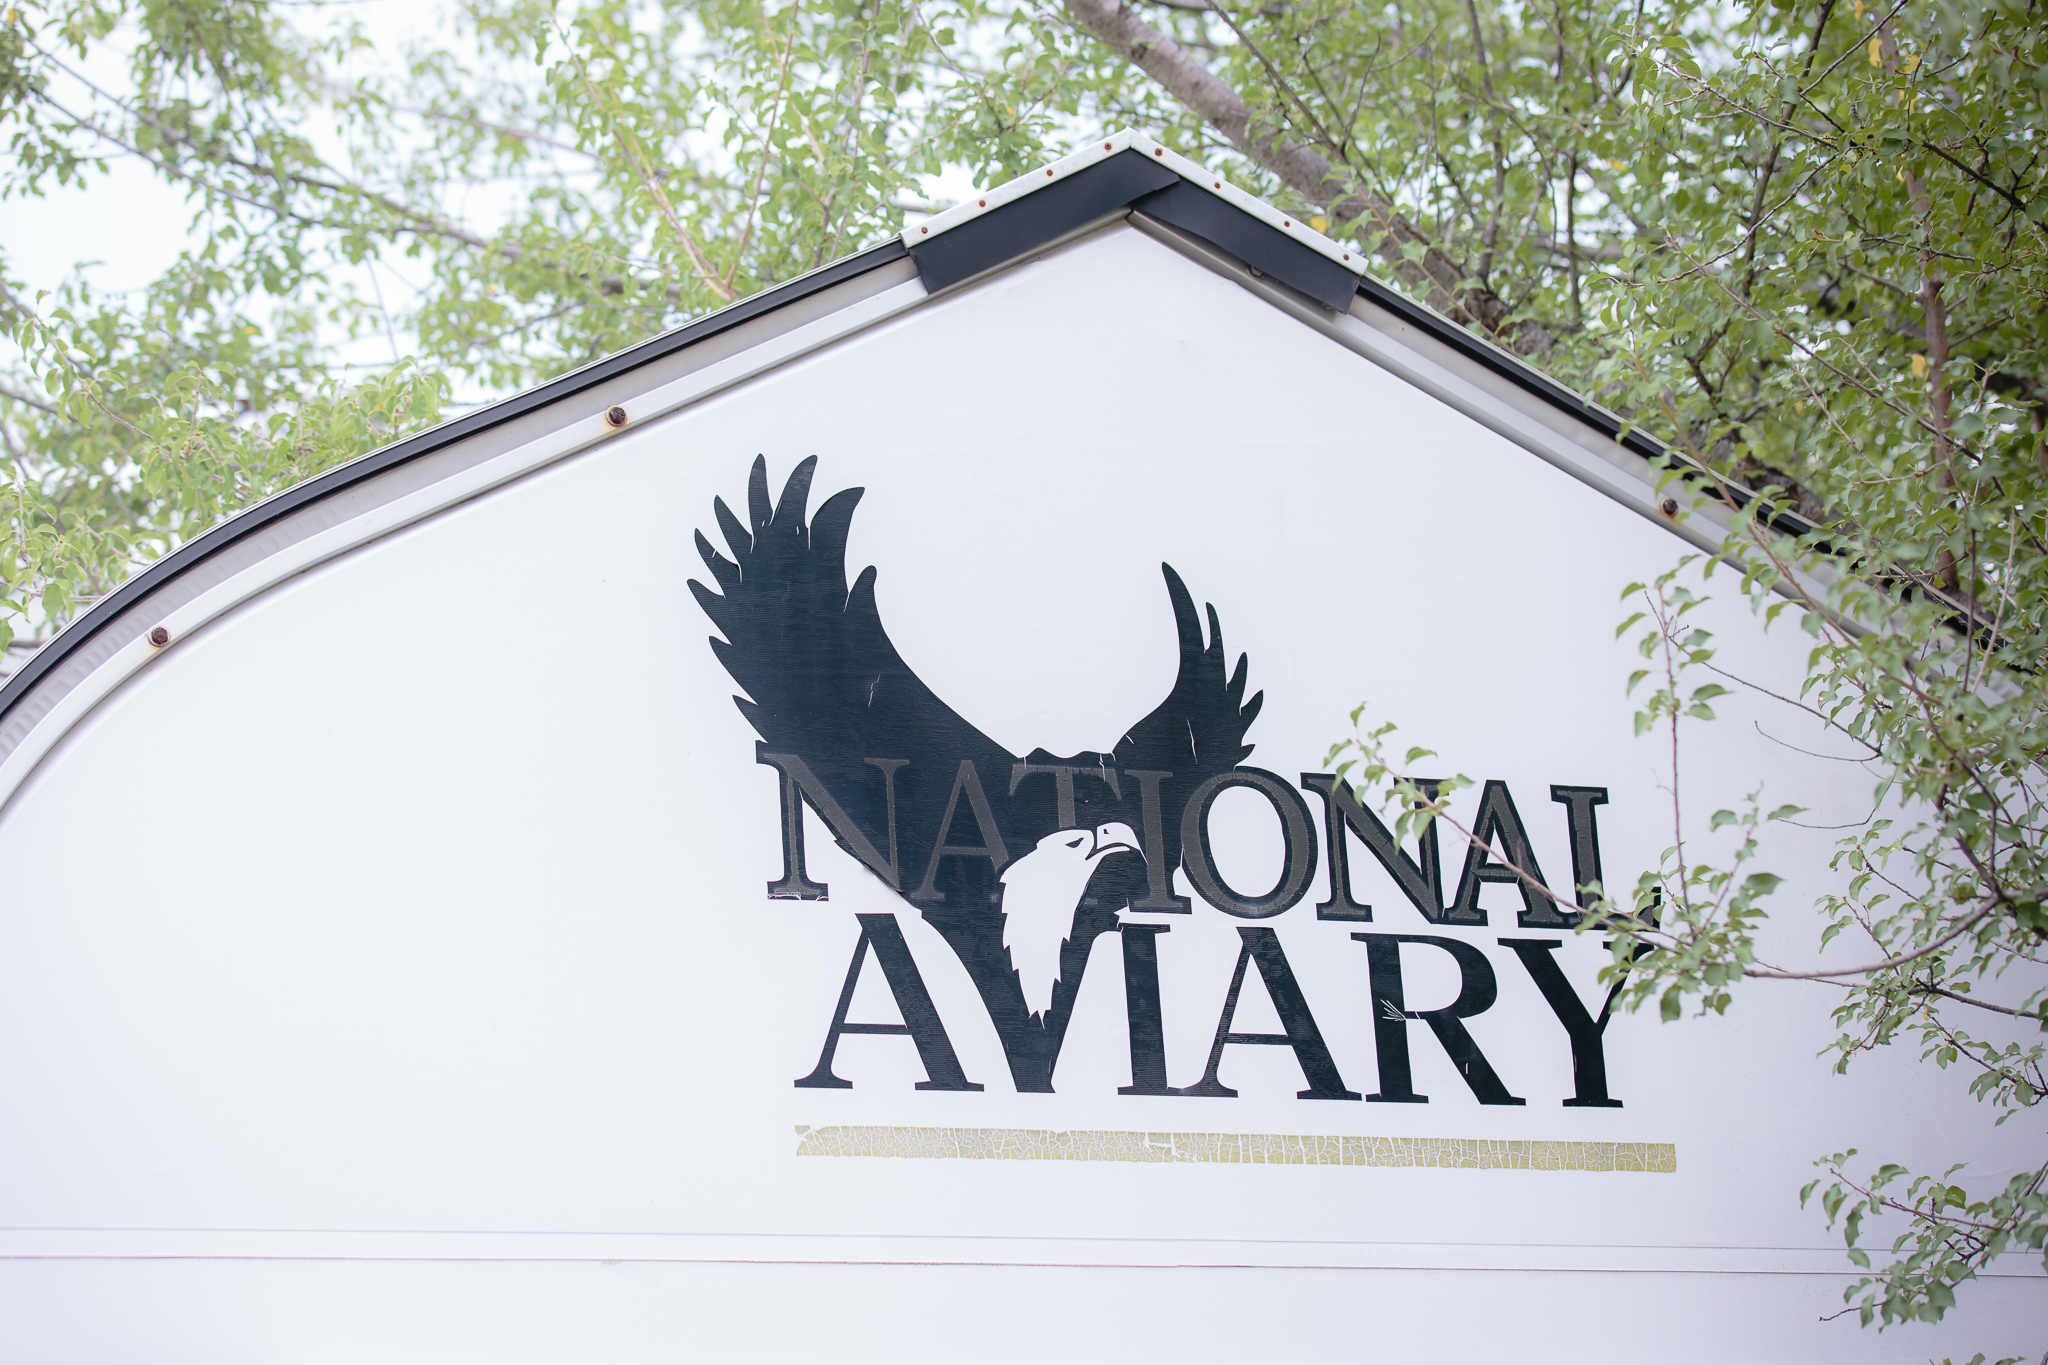 National Aviary logo in Pittsburgh, PA